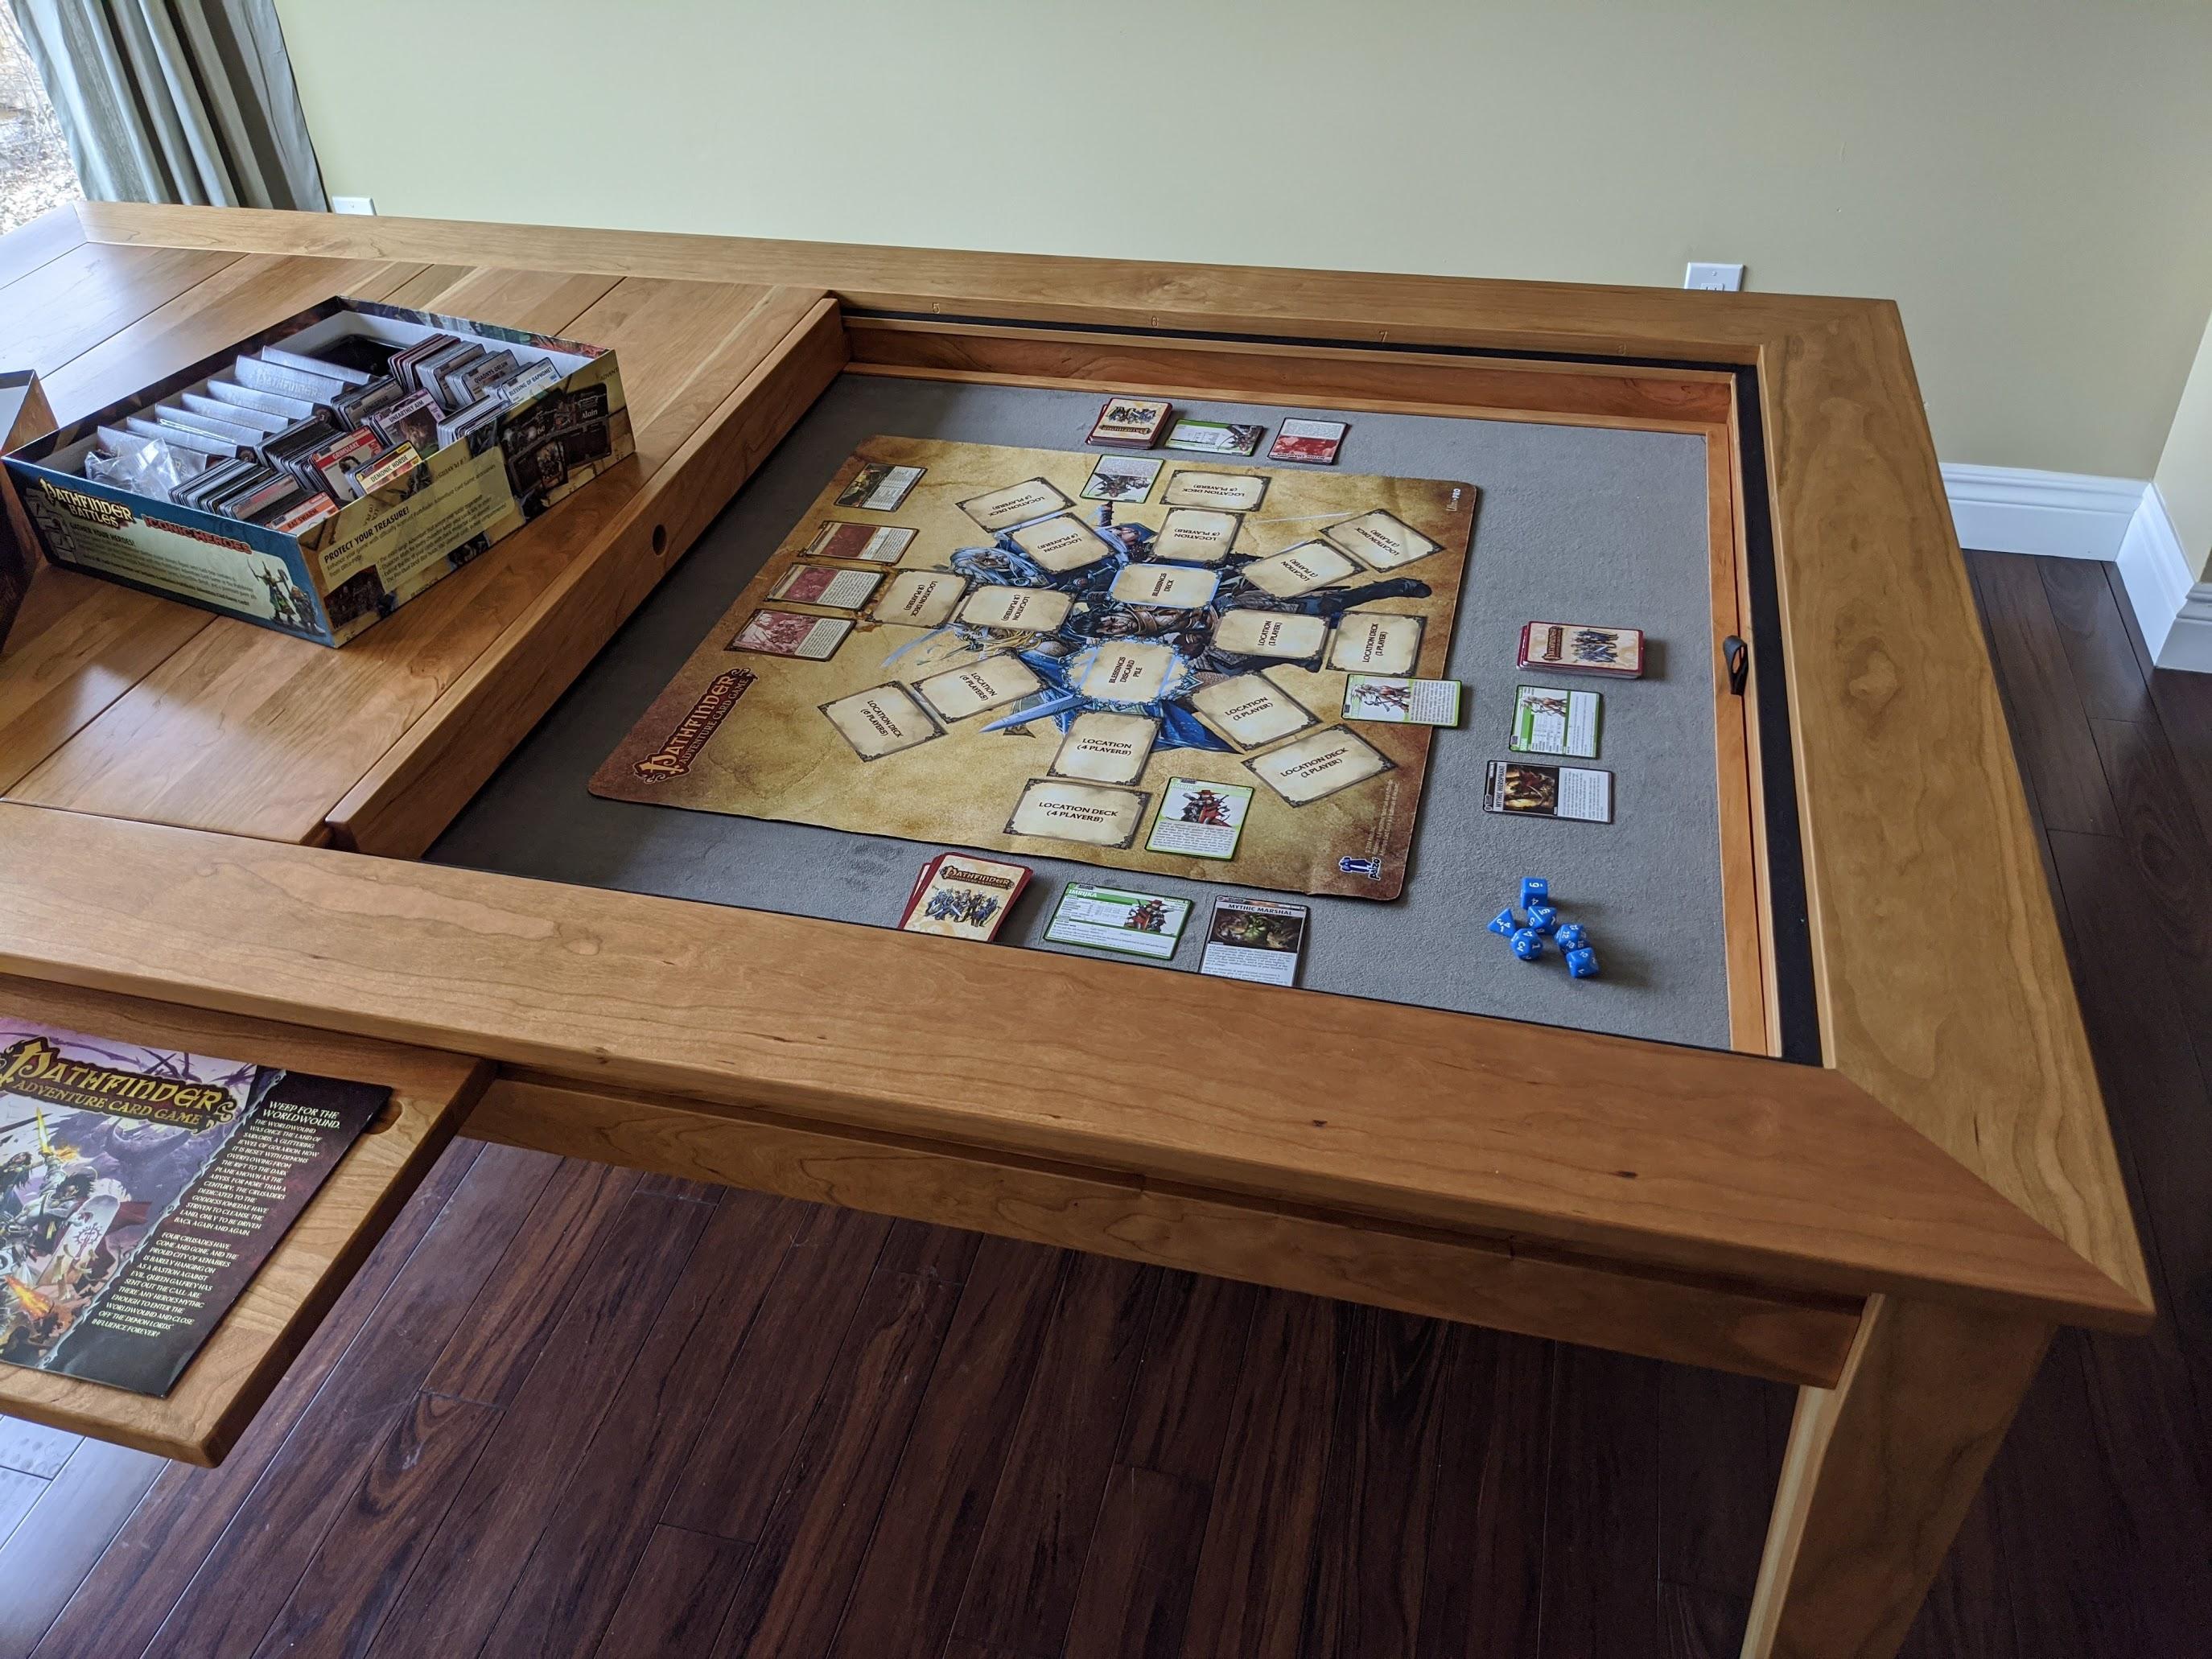 Wooden board game table in a room